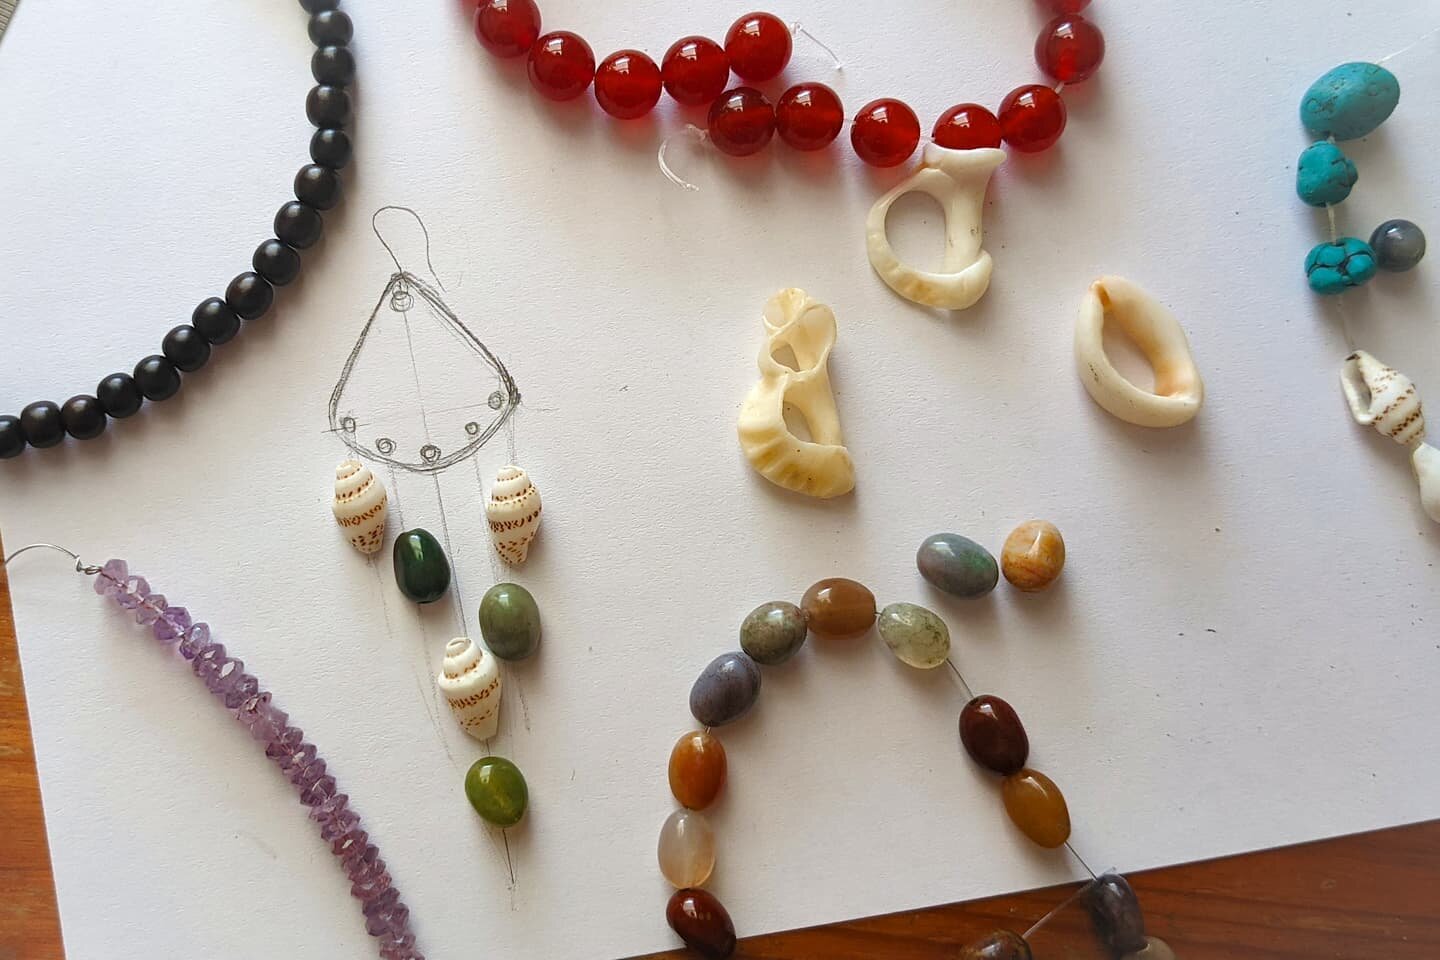 New earring in progress. Looking at what I already have, and what I should make/buy to make it happen. 

Most of the materials are either reclaimed or found. those tiny shells have been with me since 2006 in Greece. I think they might have finally fo